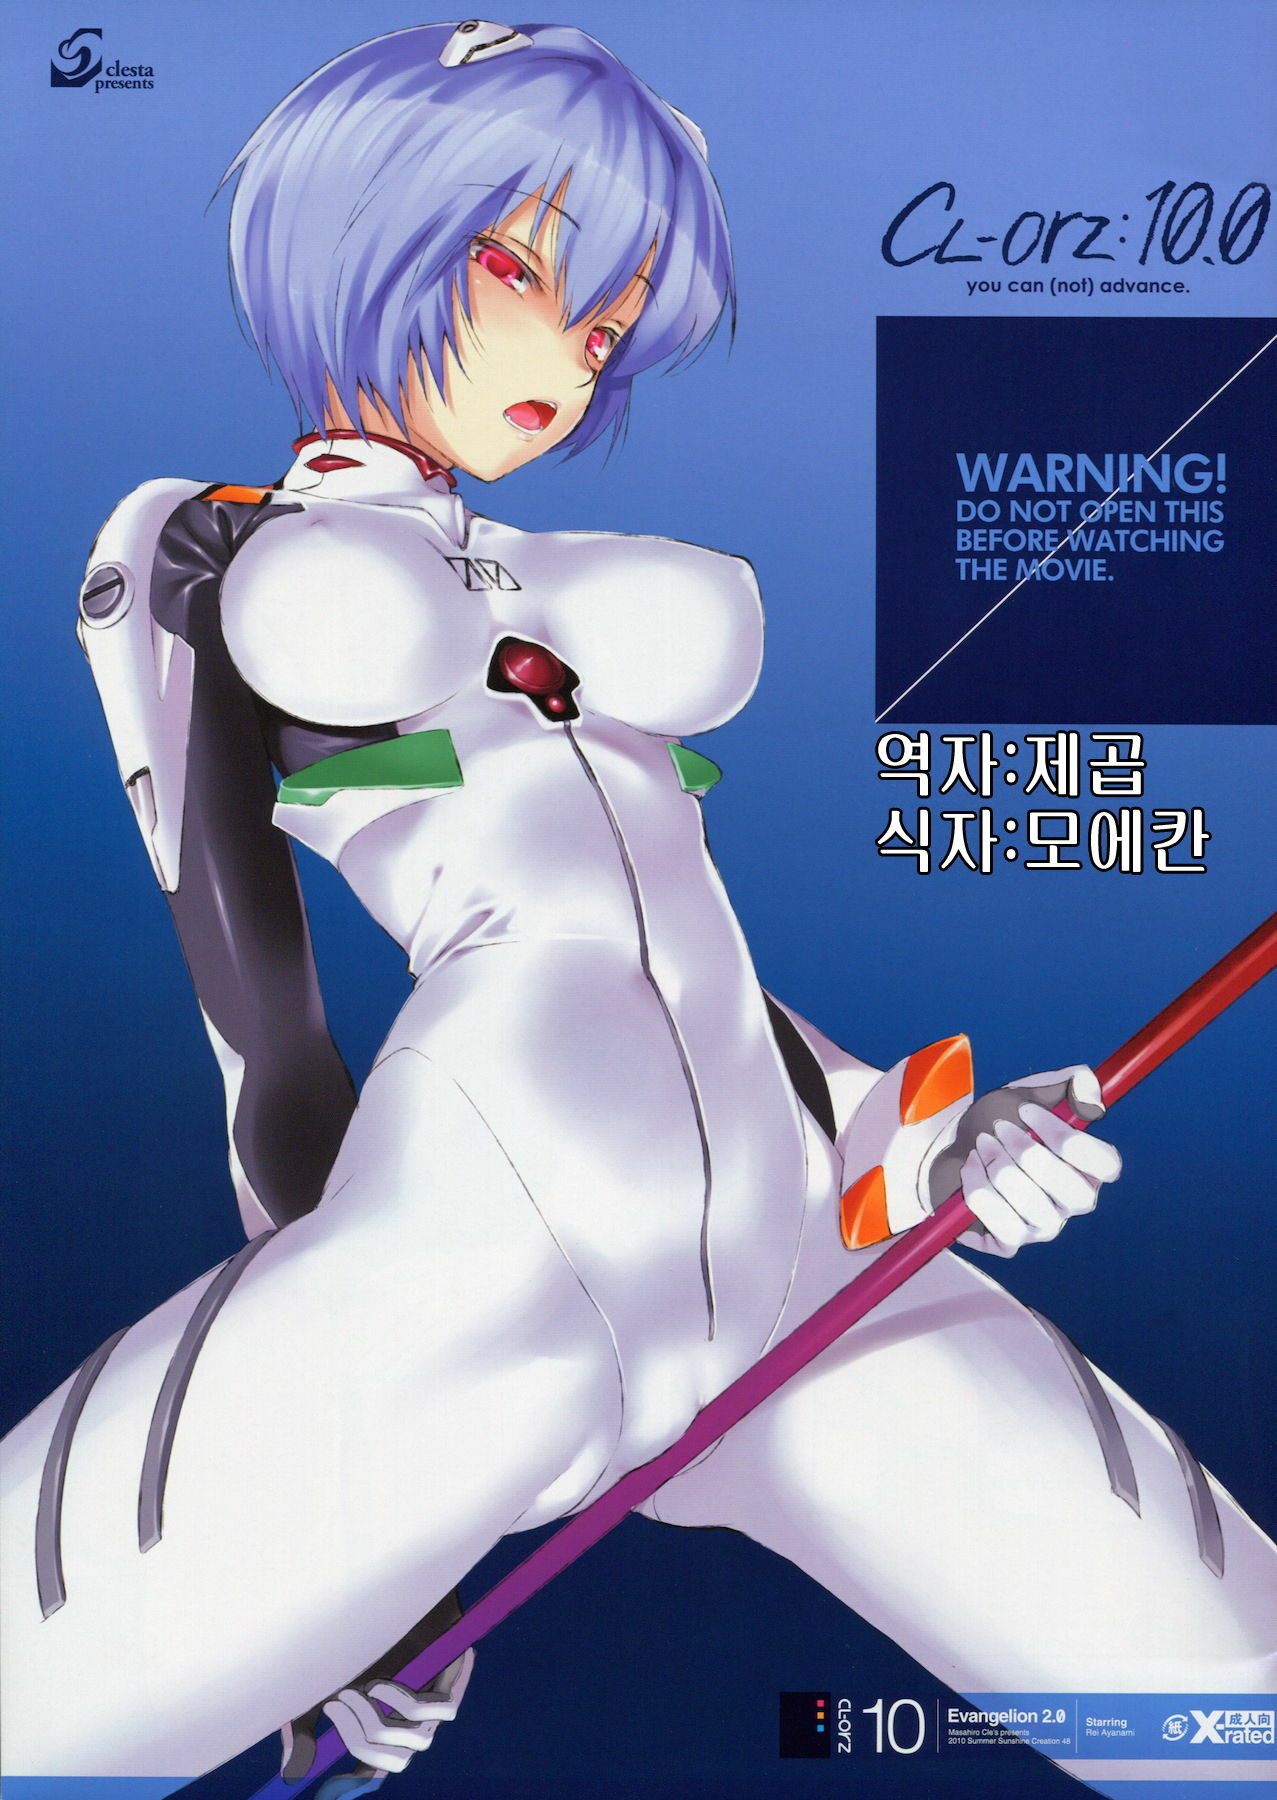 (SC48) [Clesta (Cle Masahiro)] CL-orz: 10.0 - you can (not) advance (Rebuild of Evangelion) [Korean] [제곱] page 1 full